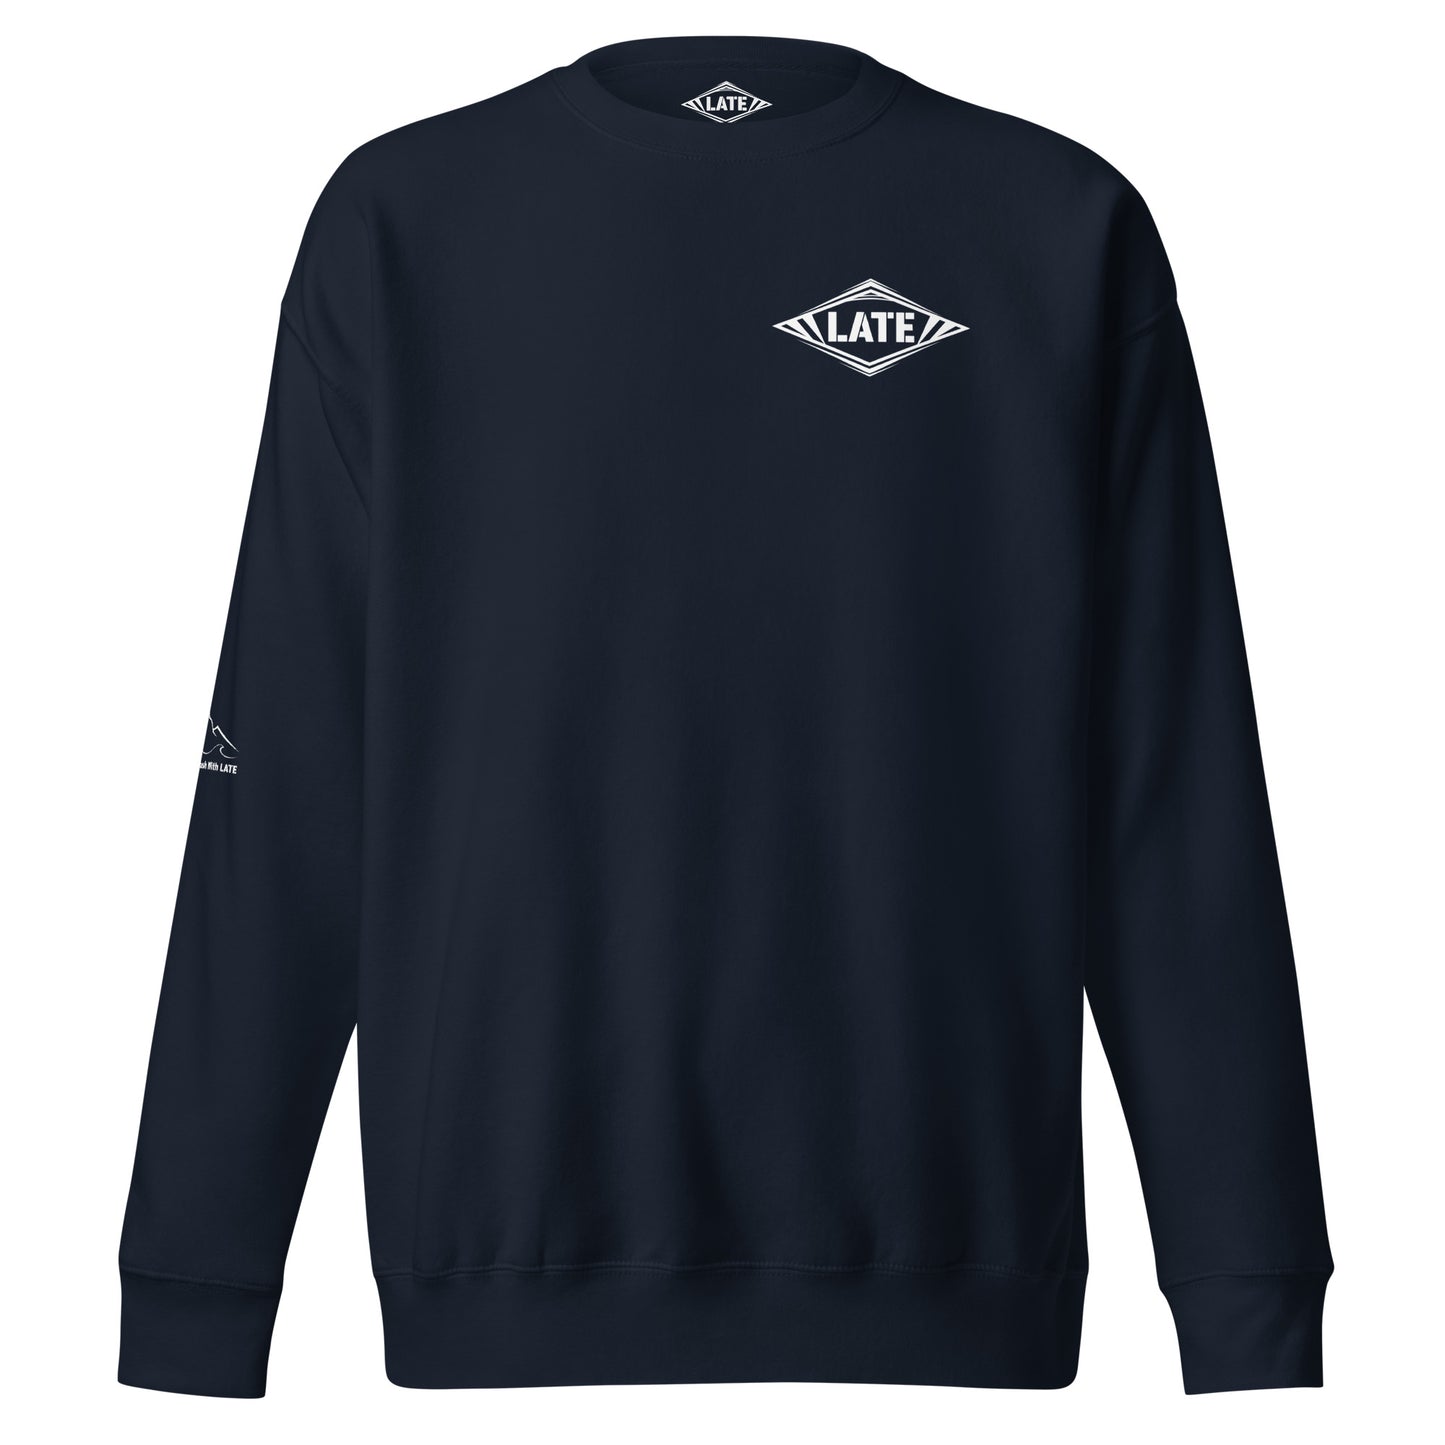 Sweatshirt snowboard Late Classics, syle the north face logo Late sweat de face couleur navy